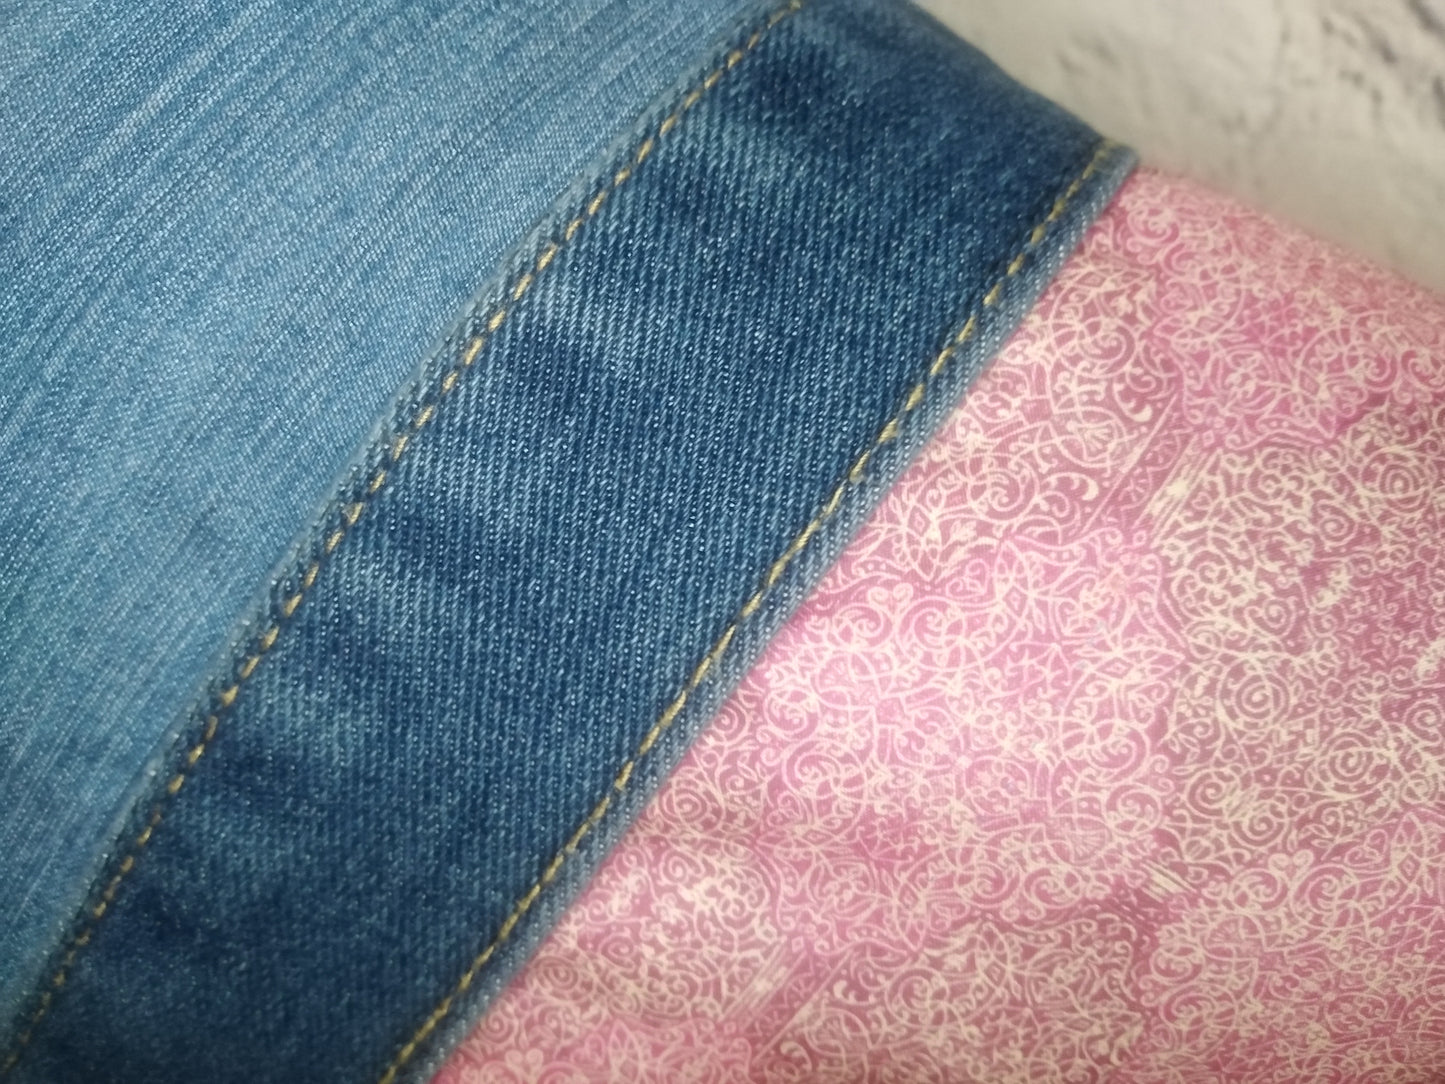 Patchwork denim and Liberty bolster cushion cover